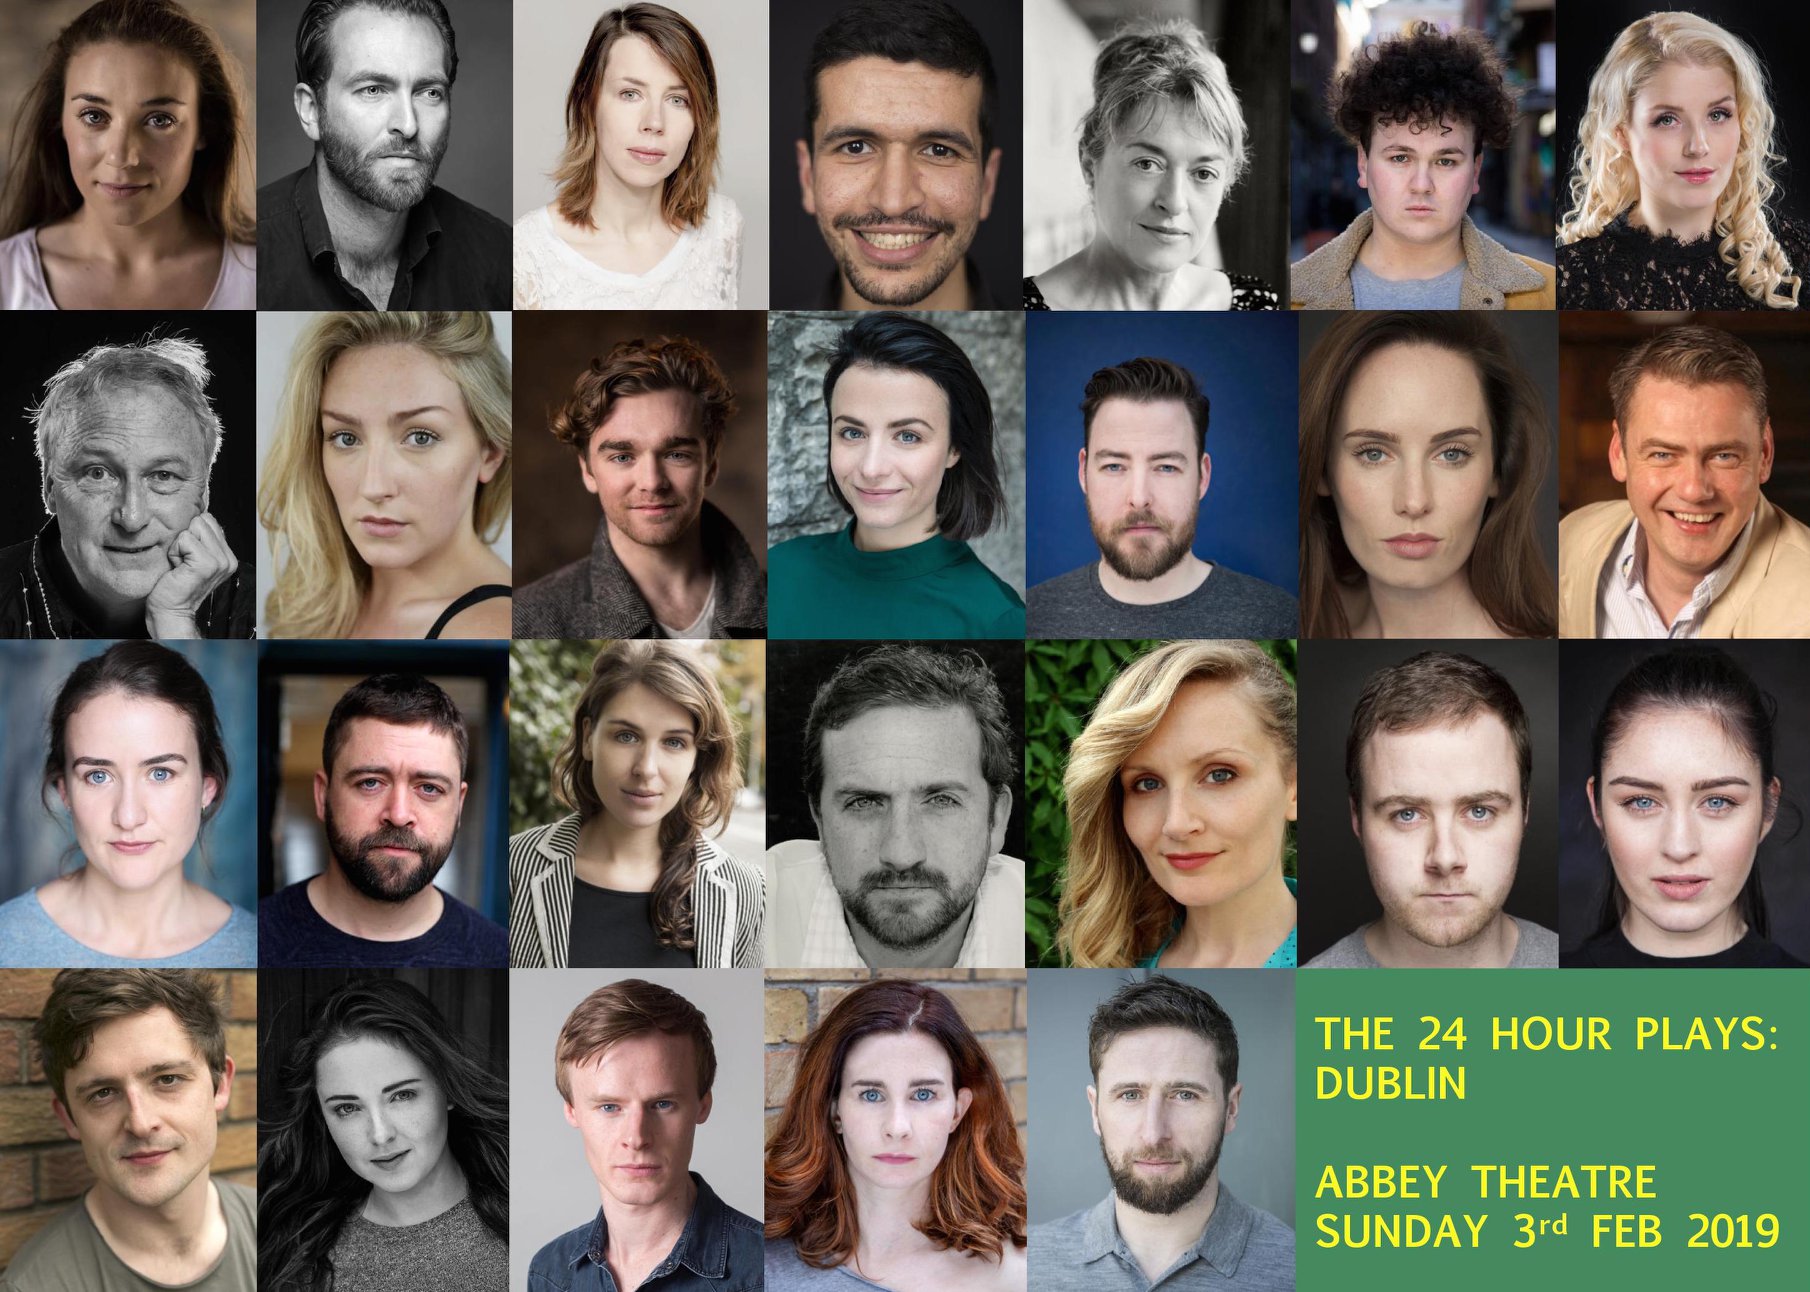 Catch Amy Feb 3 as part of The 24 Hour Plays: Dublin, in aid of Dublin Youth Theatre at The Abbey Theatre